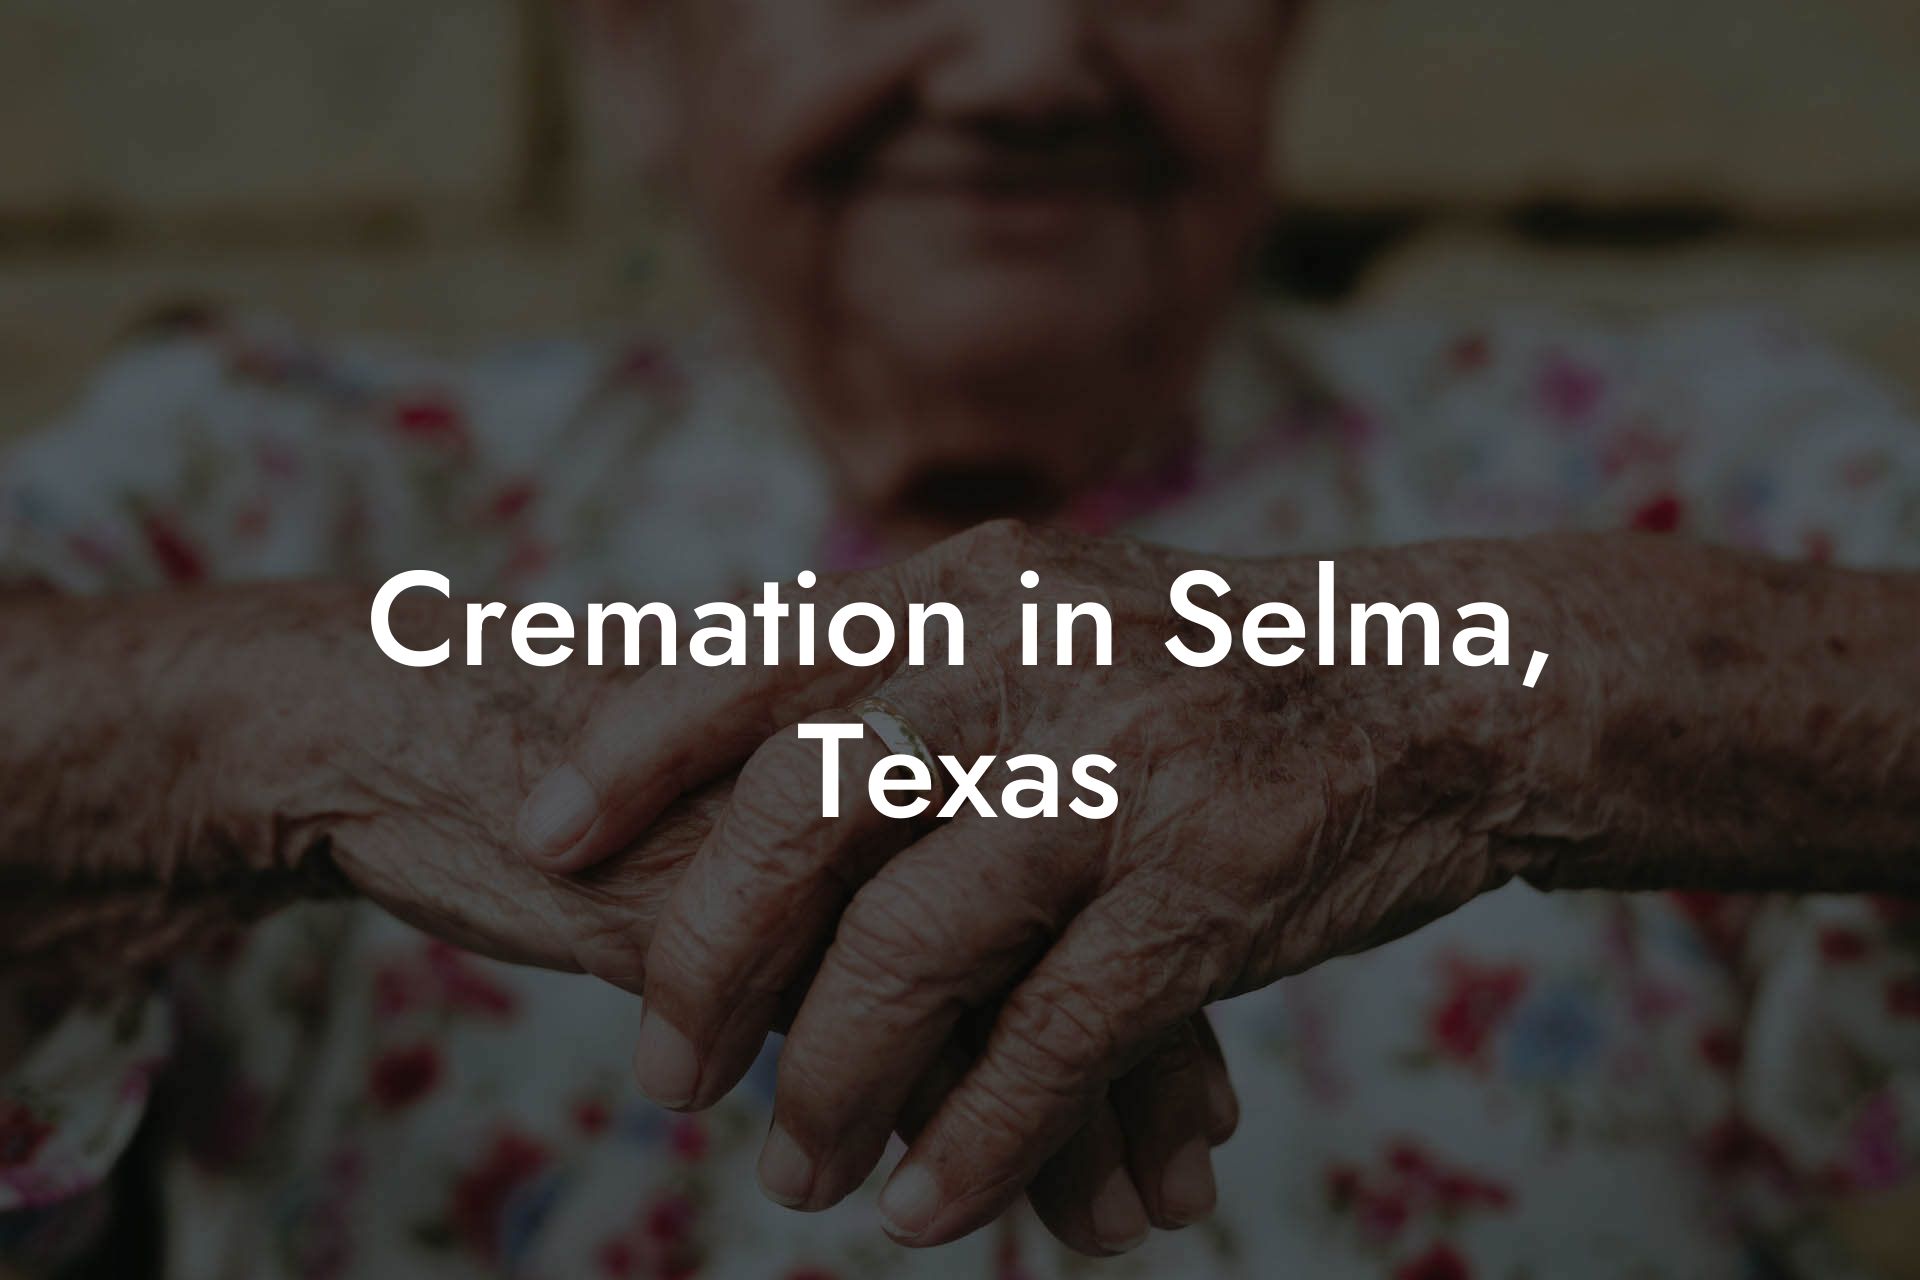 Cremation in Selma, Texas